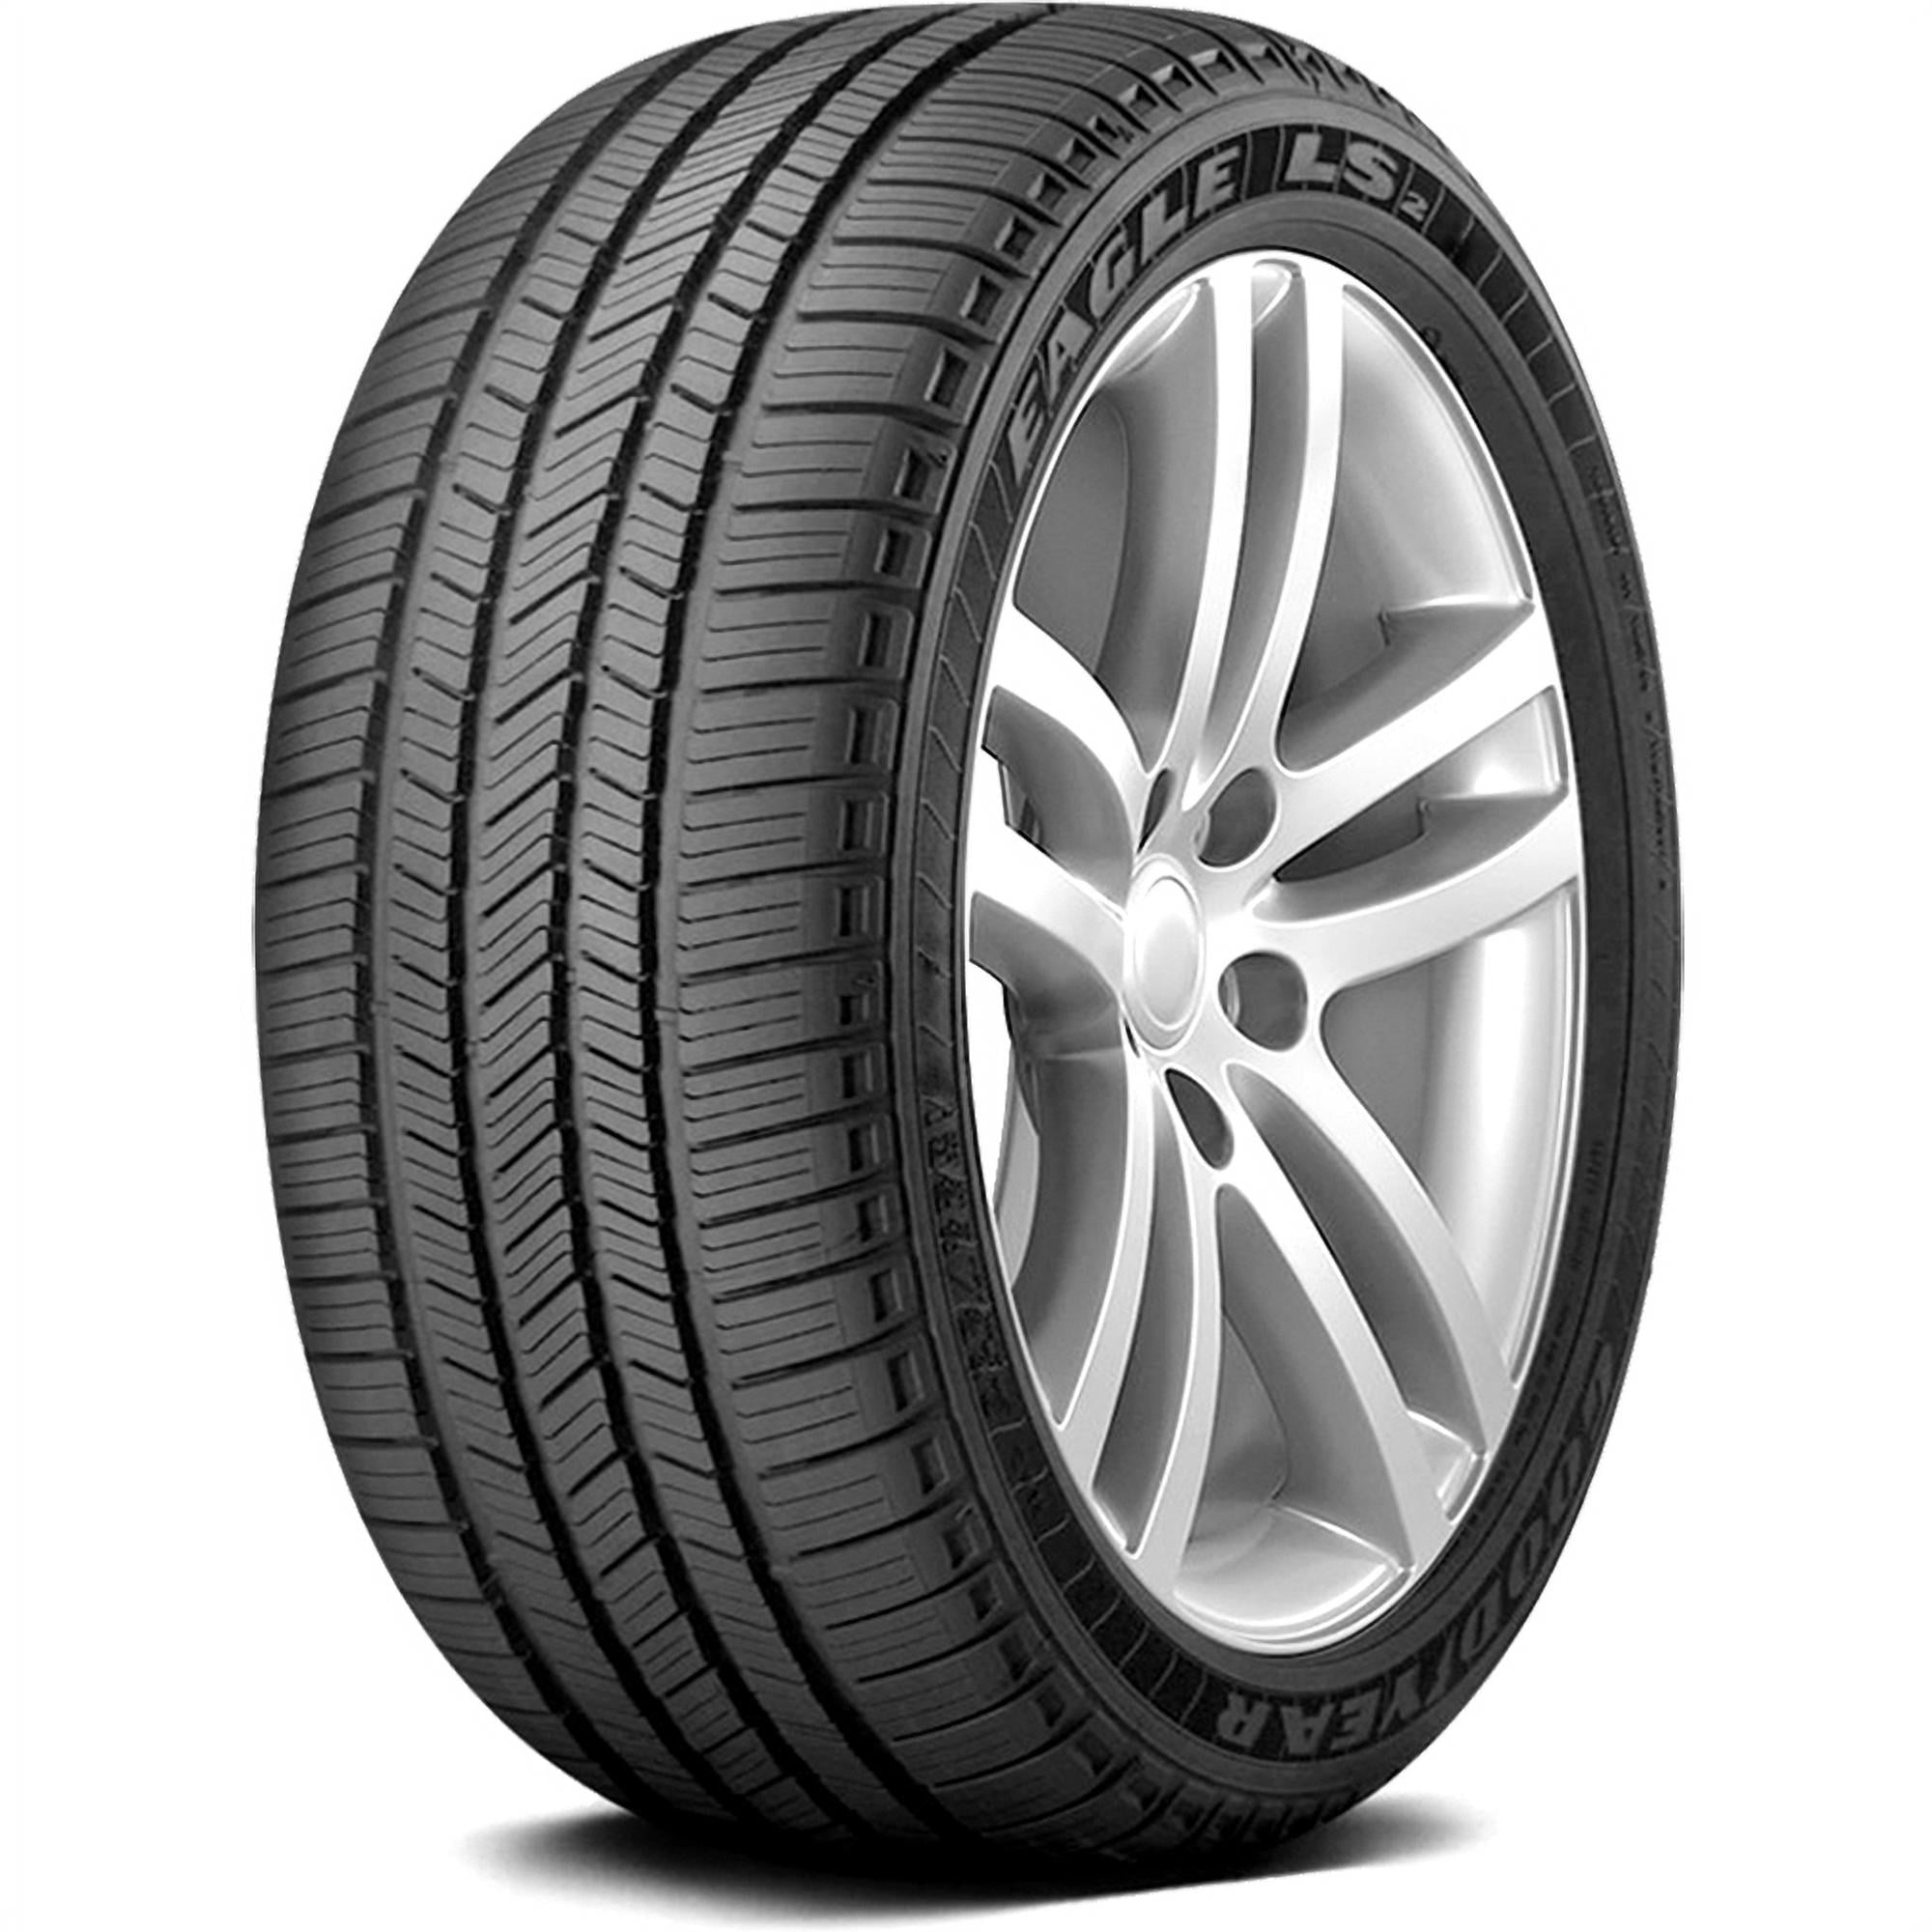 Goodyear Eagle Ls2 275/55R20 111S Tire